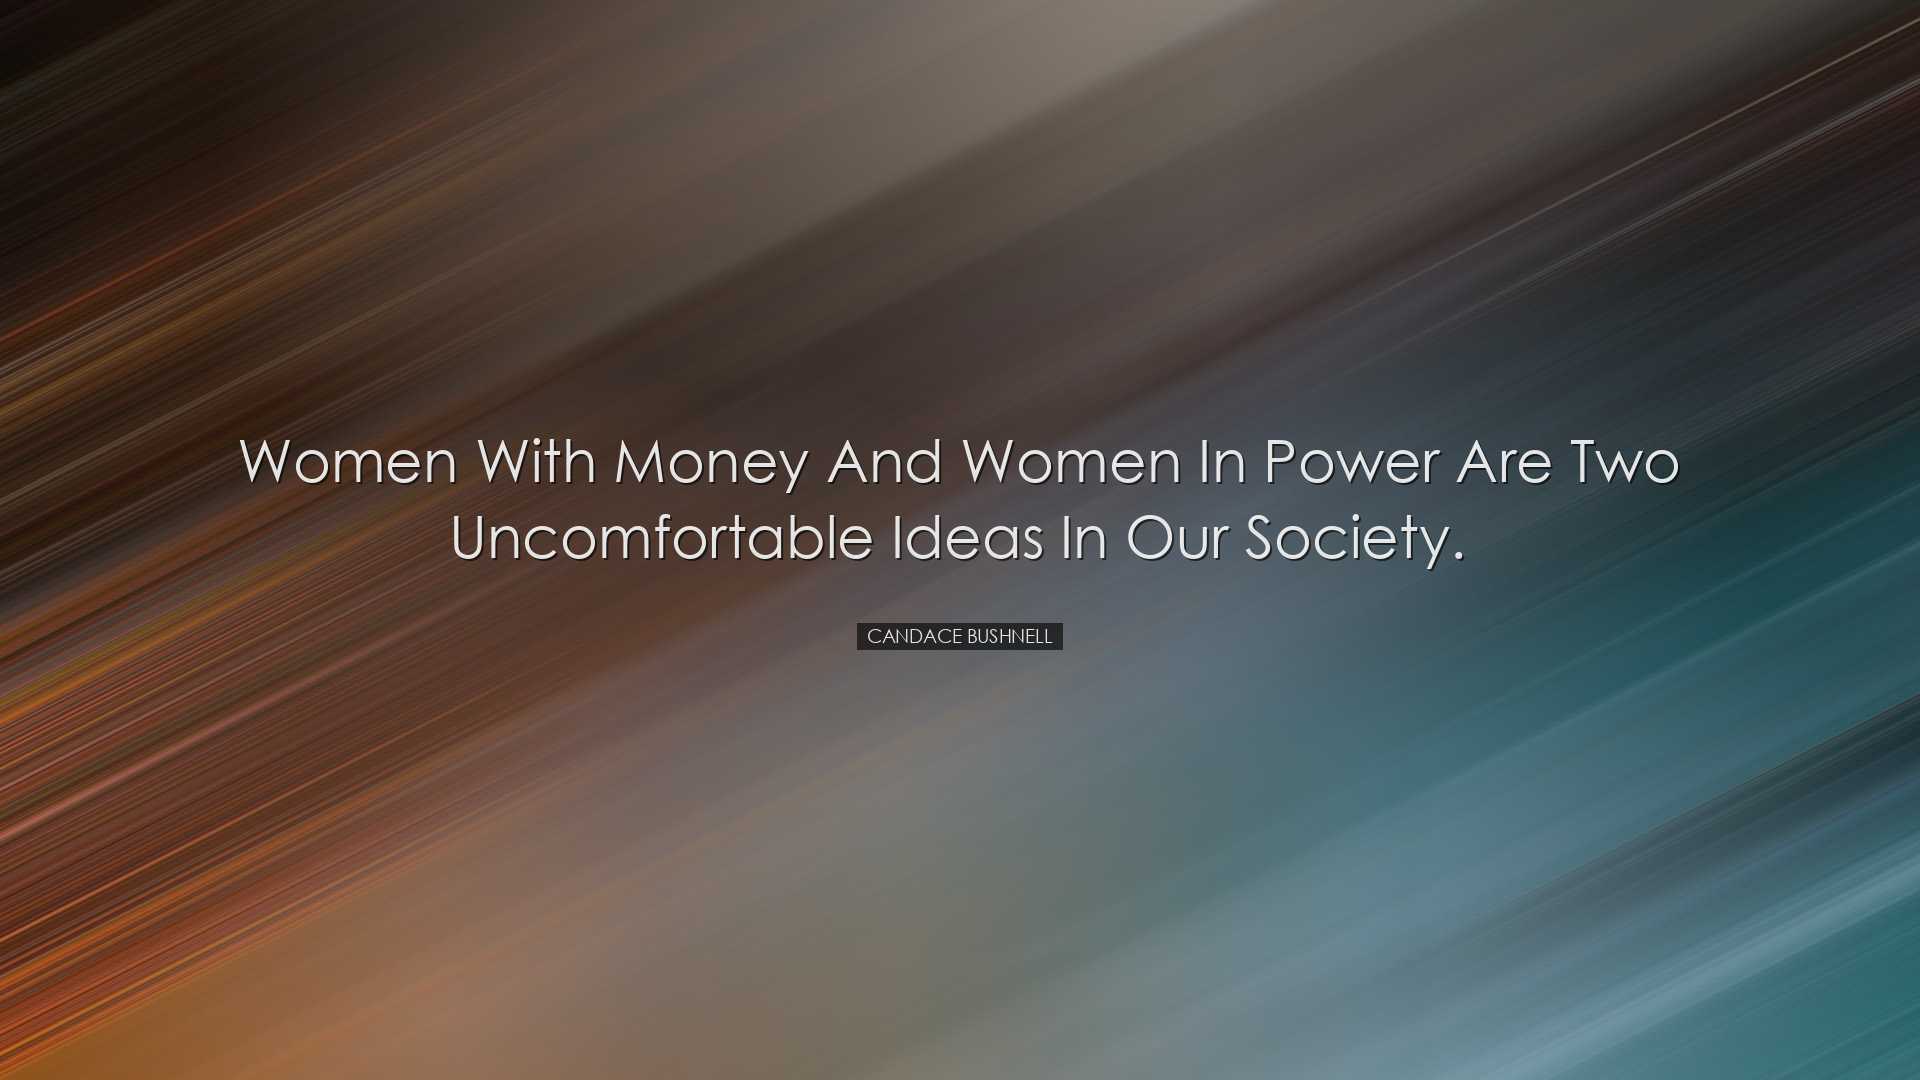 Women with money and women in power are two uncomfortable ideas in